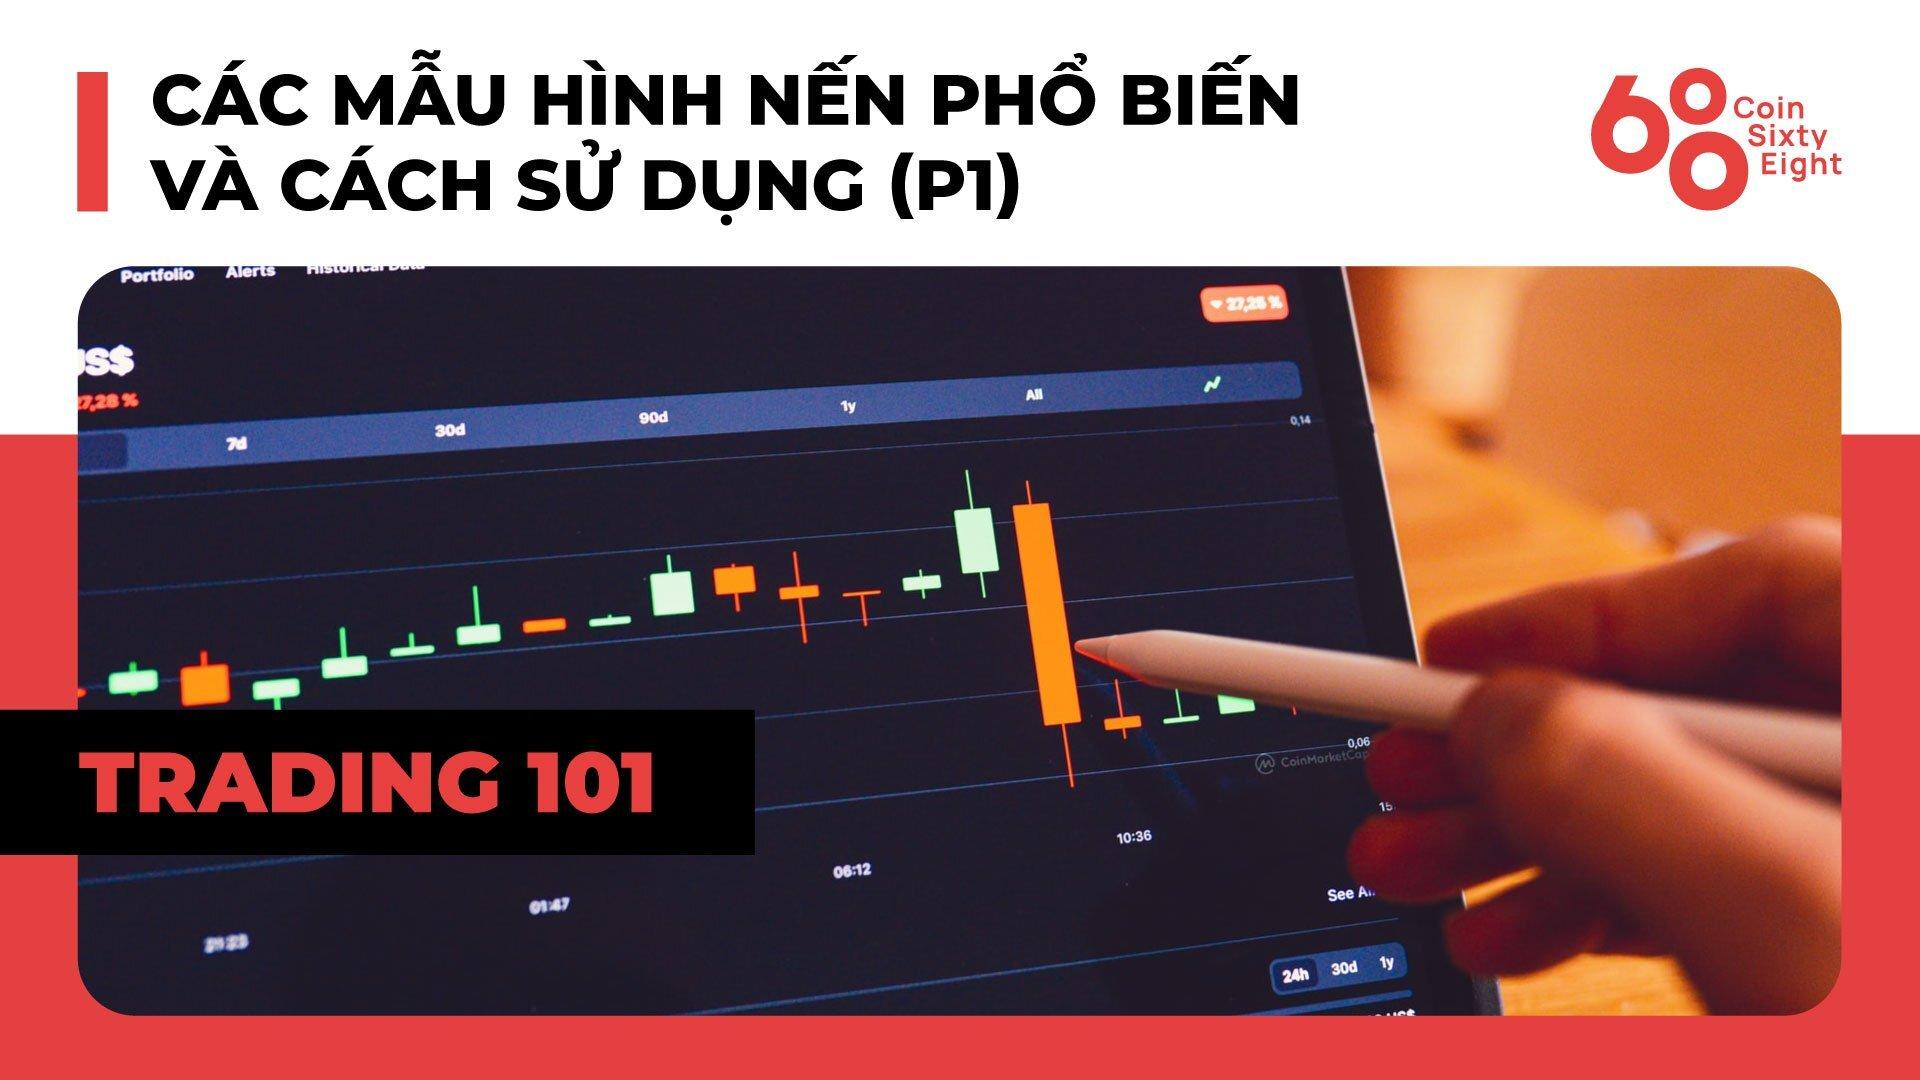 lop-giao-dich-101-price-action-trading-phan-9-cac-mau-hinh-nen-pho-bien-va-cach-su-dung-p1